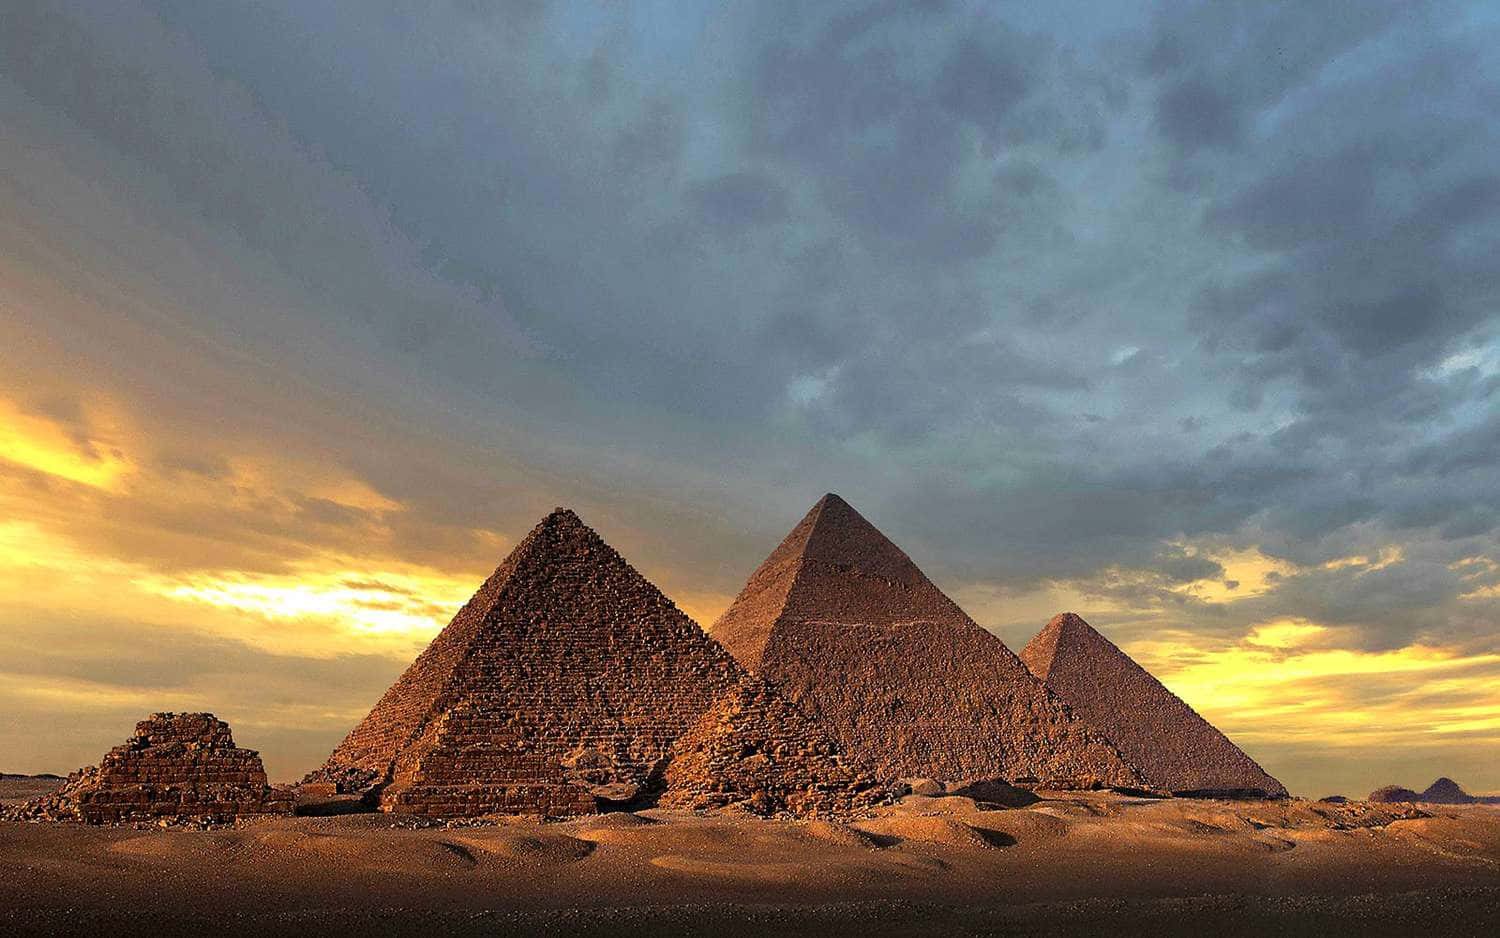 The Pyramids Of Giza Shadowed By An Overcast Sky Wallpaper